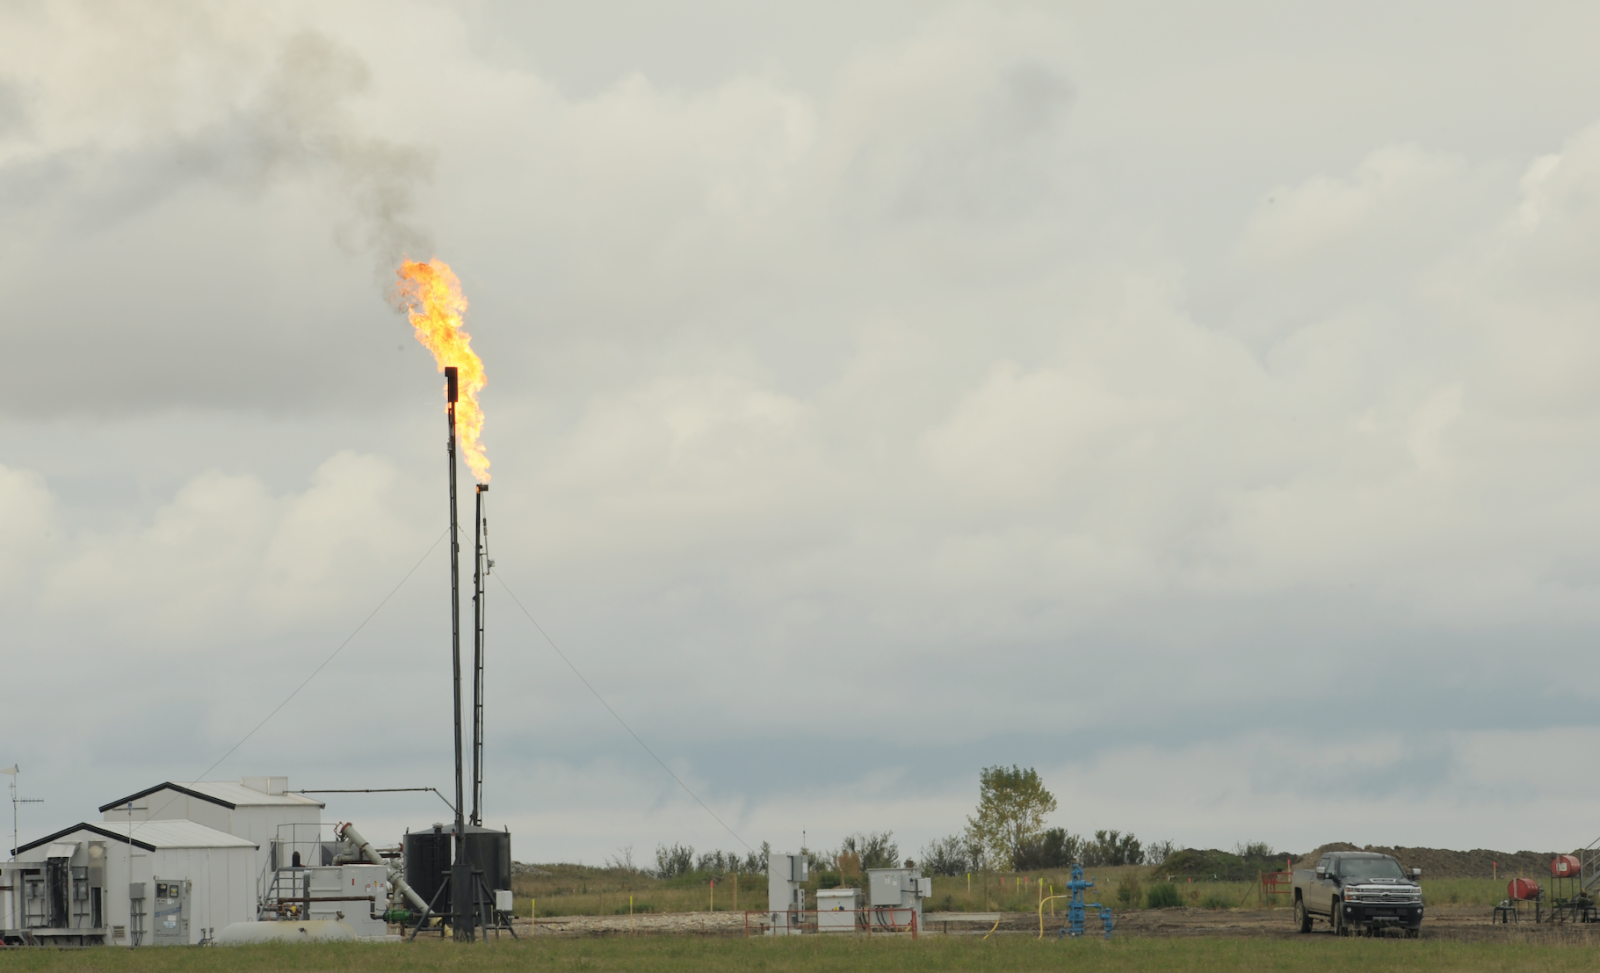 Mark Taylor, The Price of Oil, Toronto Star, Flare Stack, oil field